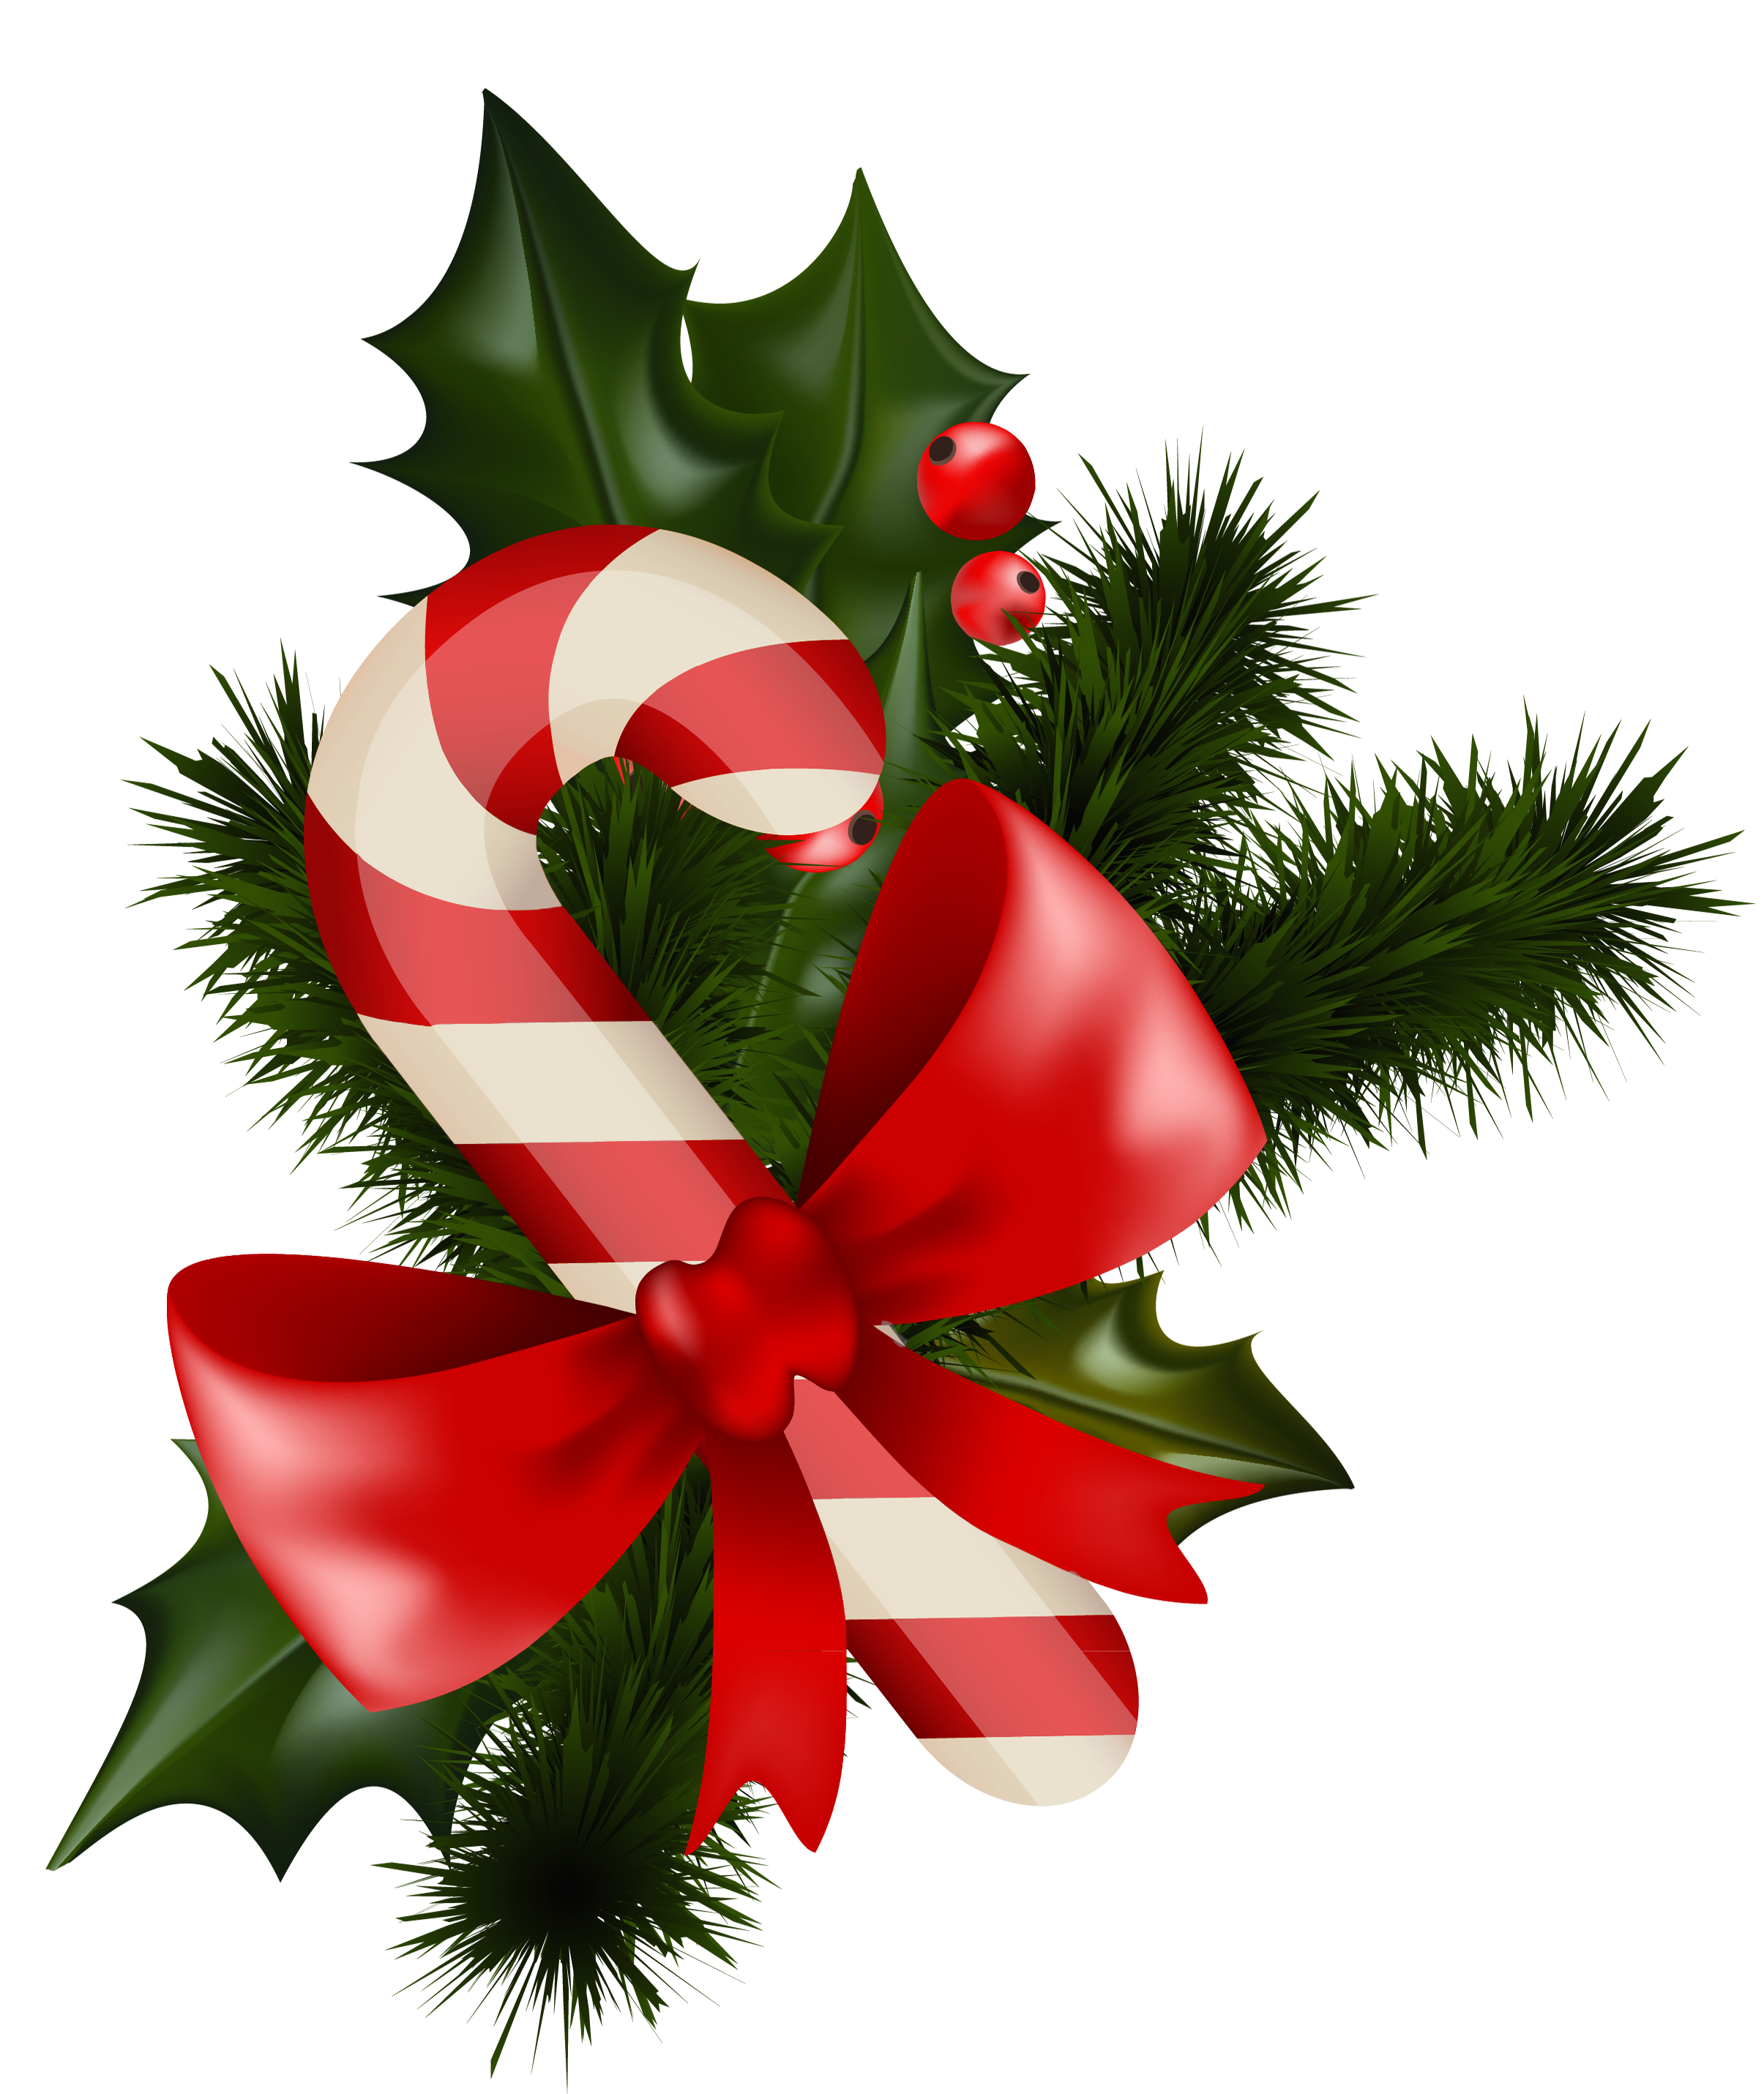 Transparent_Christmas_Candy_Cane_with_Mistletoe.png?m=1383001200